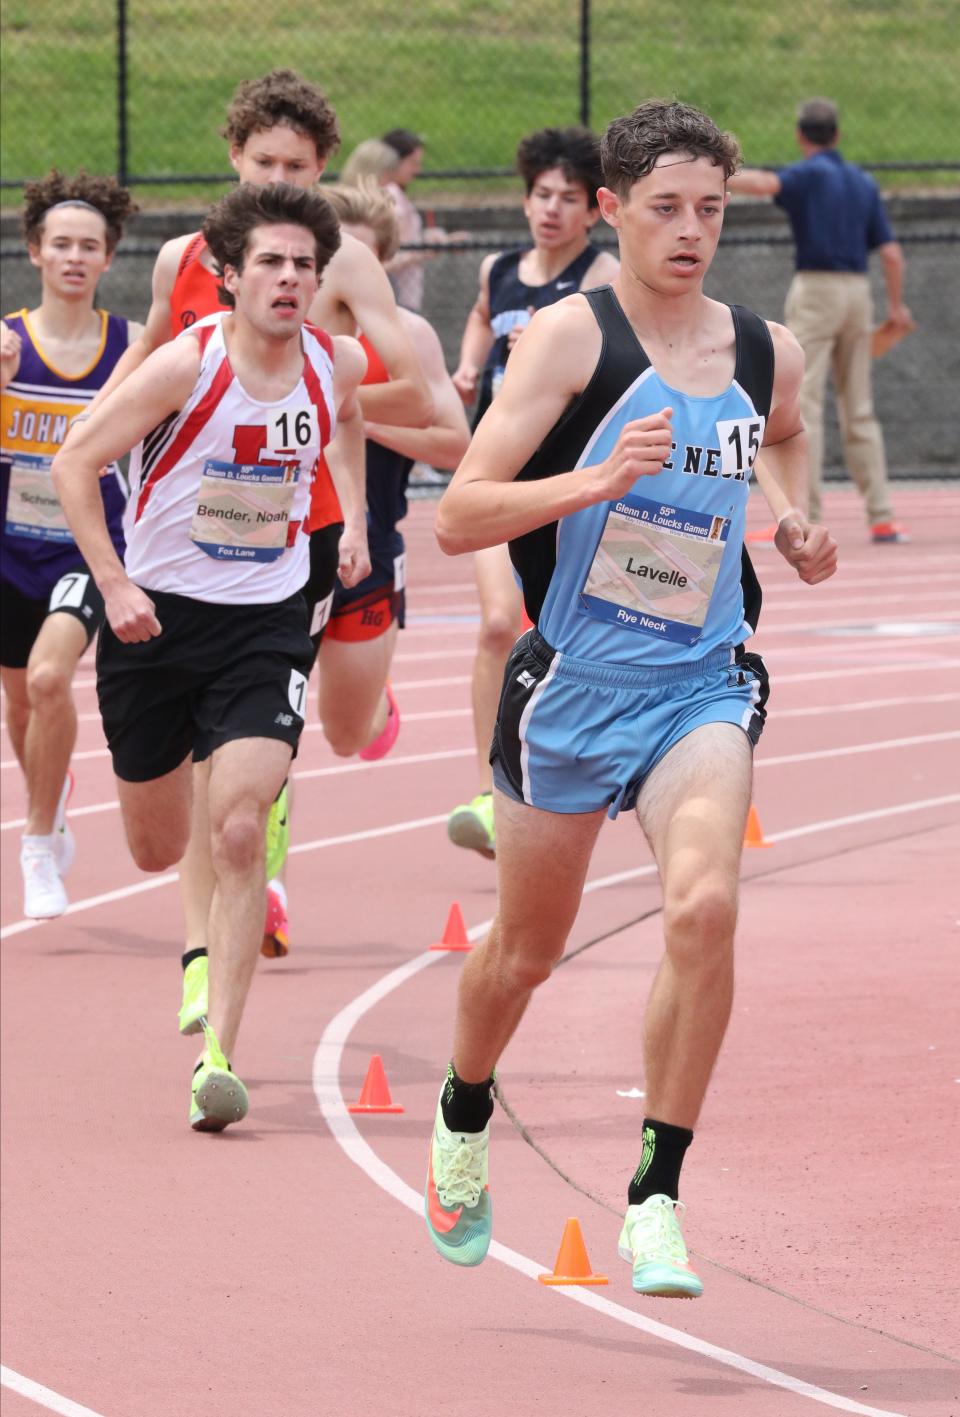 Joseph Lavelle from Rye Neck competes in the men's Section One mile during the 55th annual Glenn D. Loucks Track & Field Games at White Plains High School, May 13, 2023. 